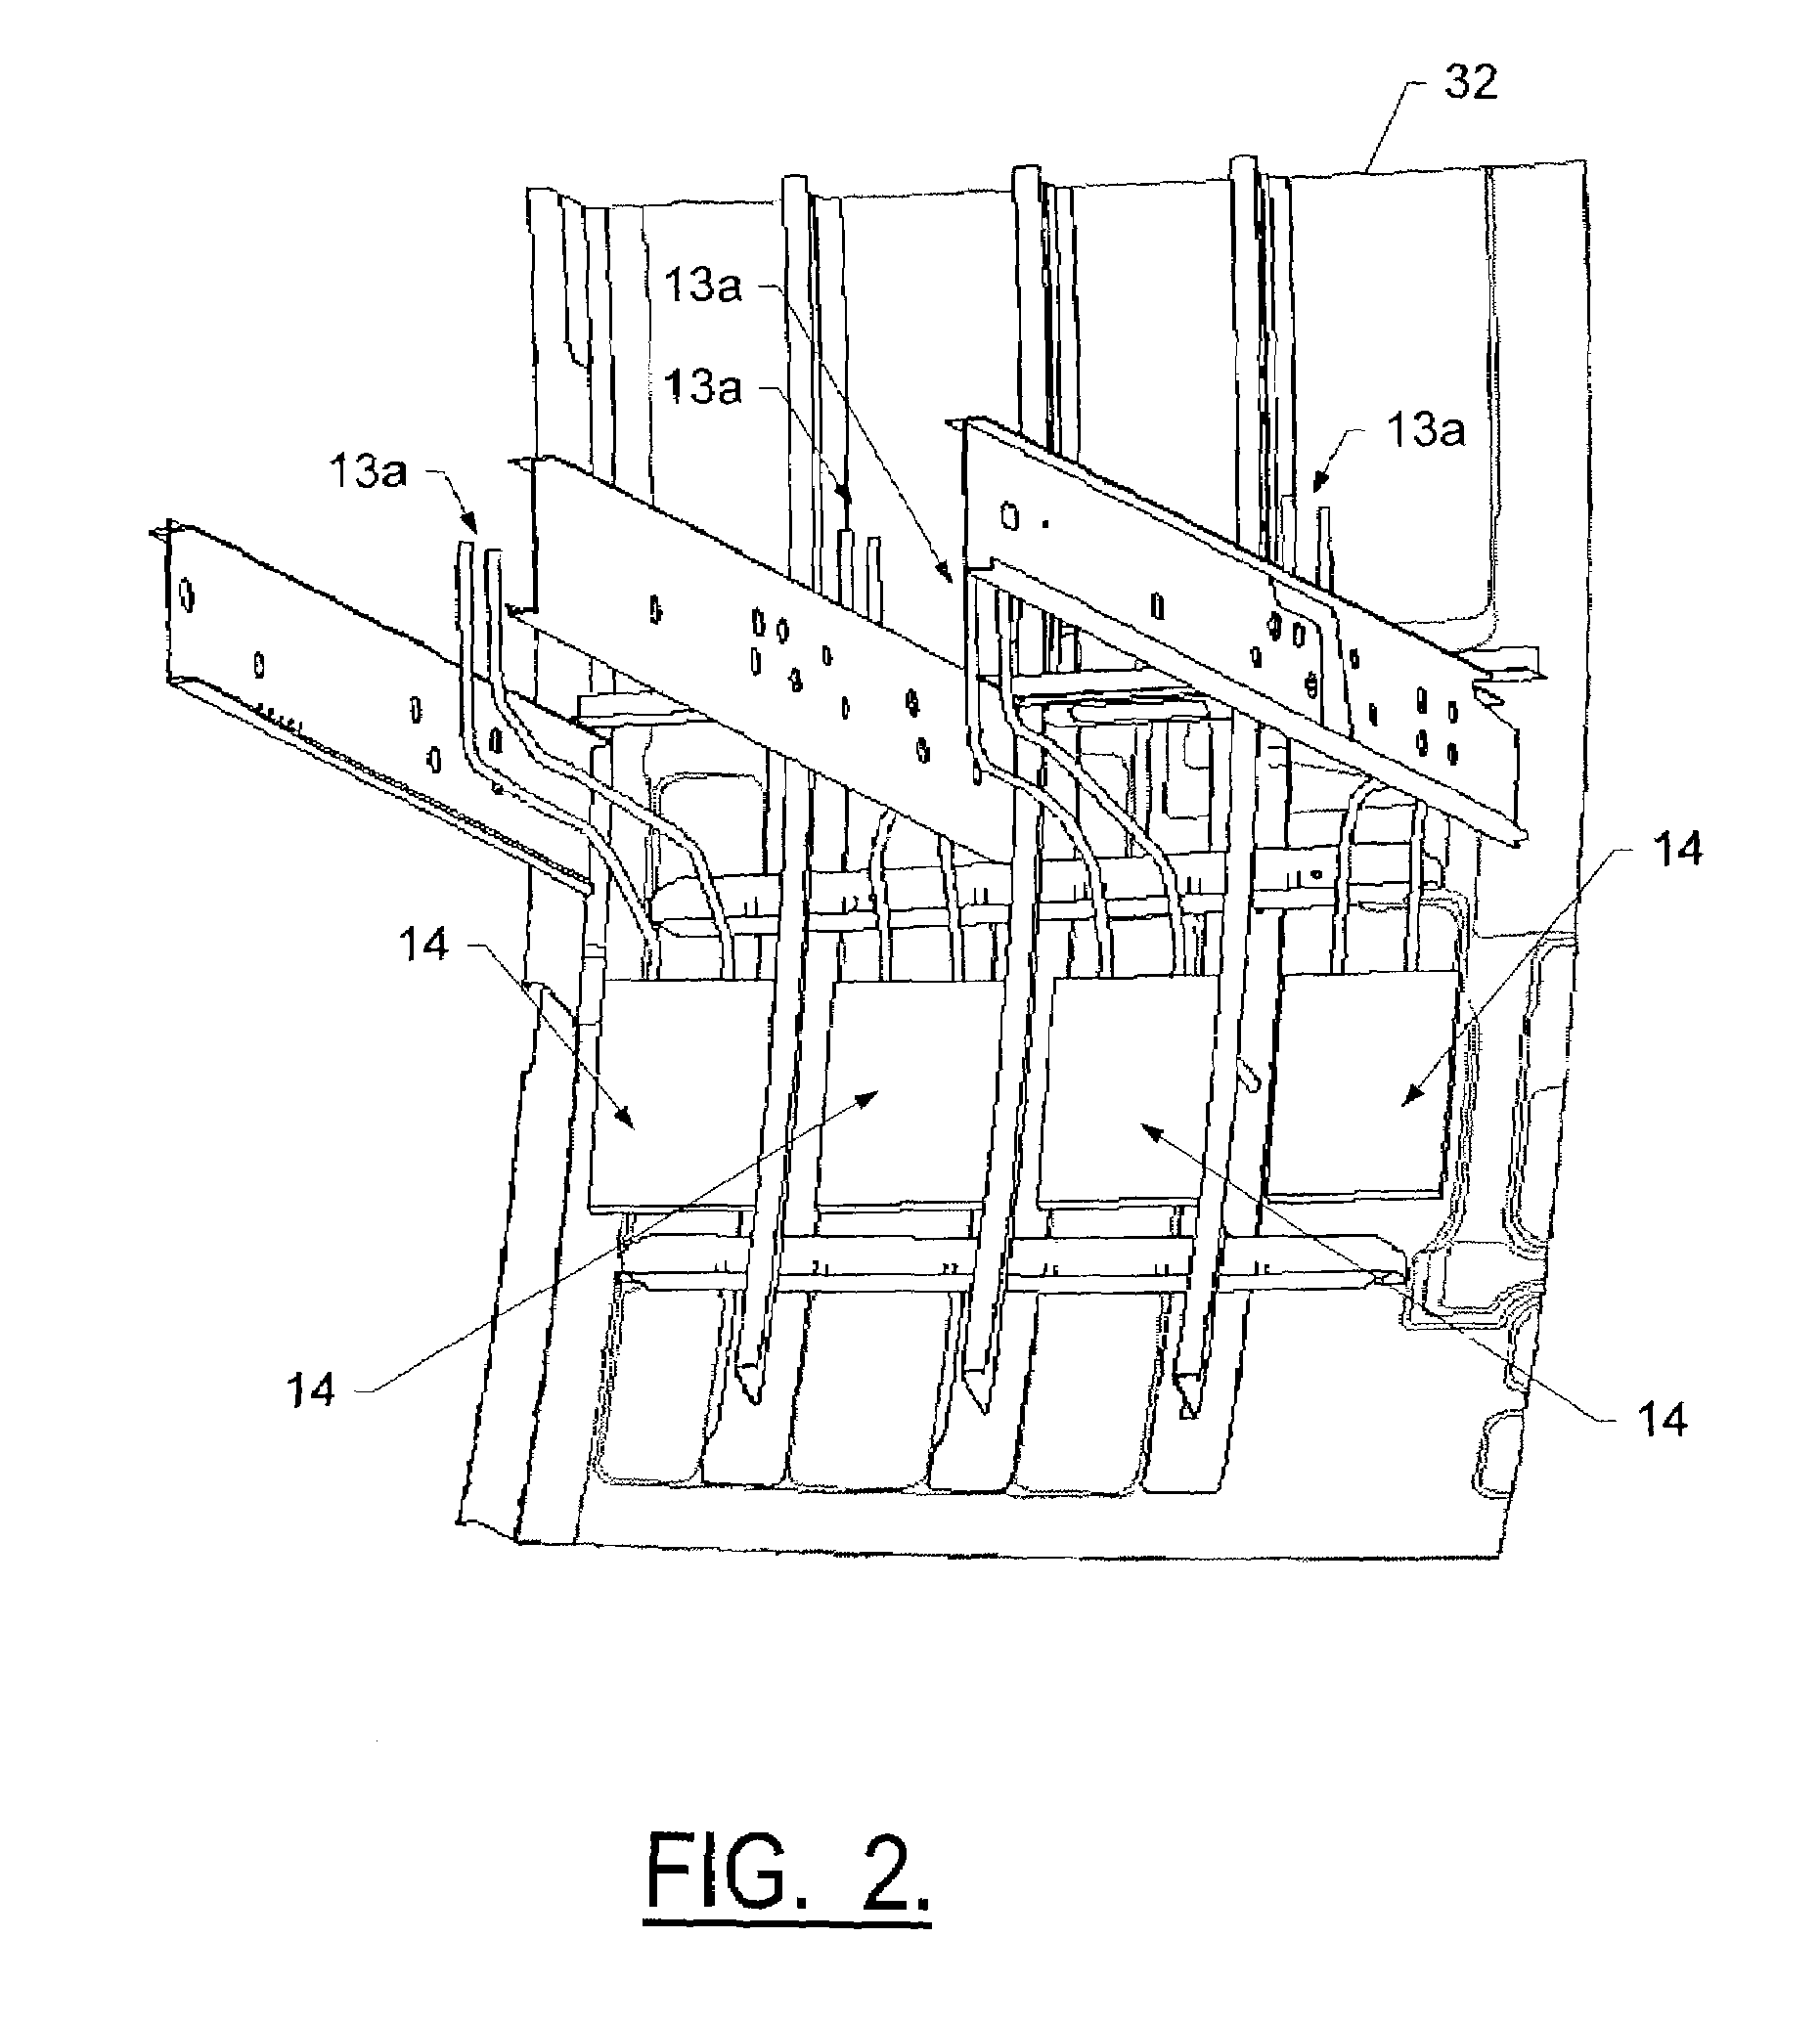 System and method of refrigerating at least one enclosure